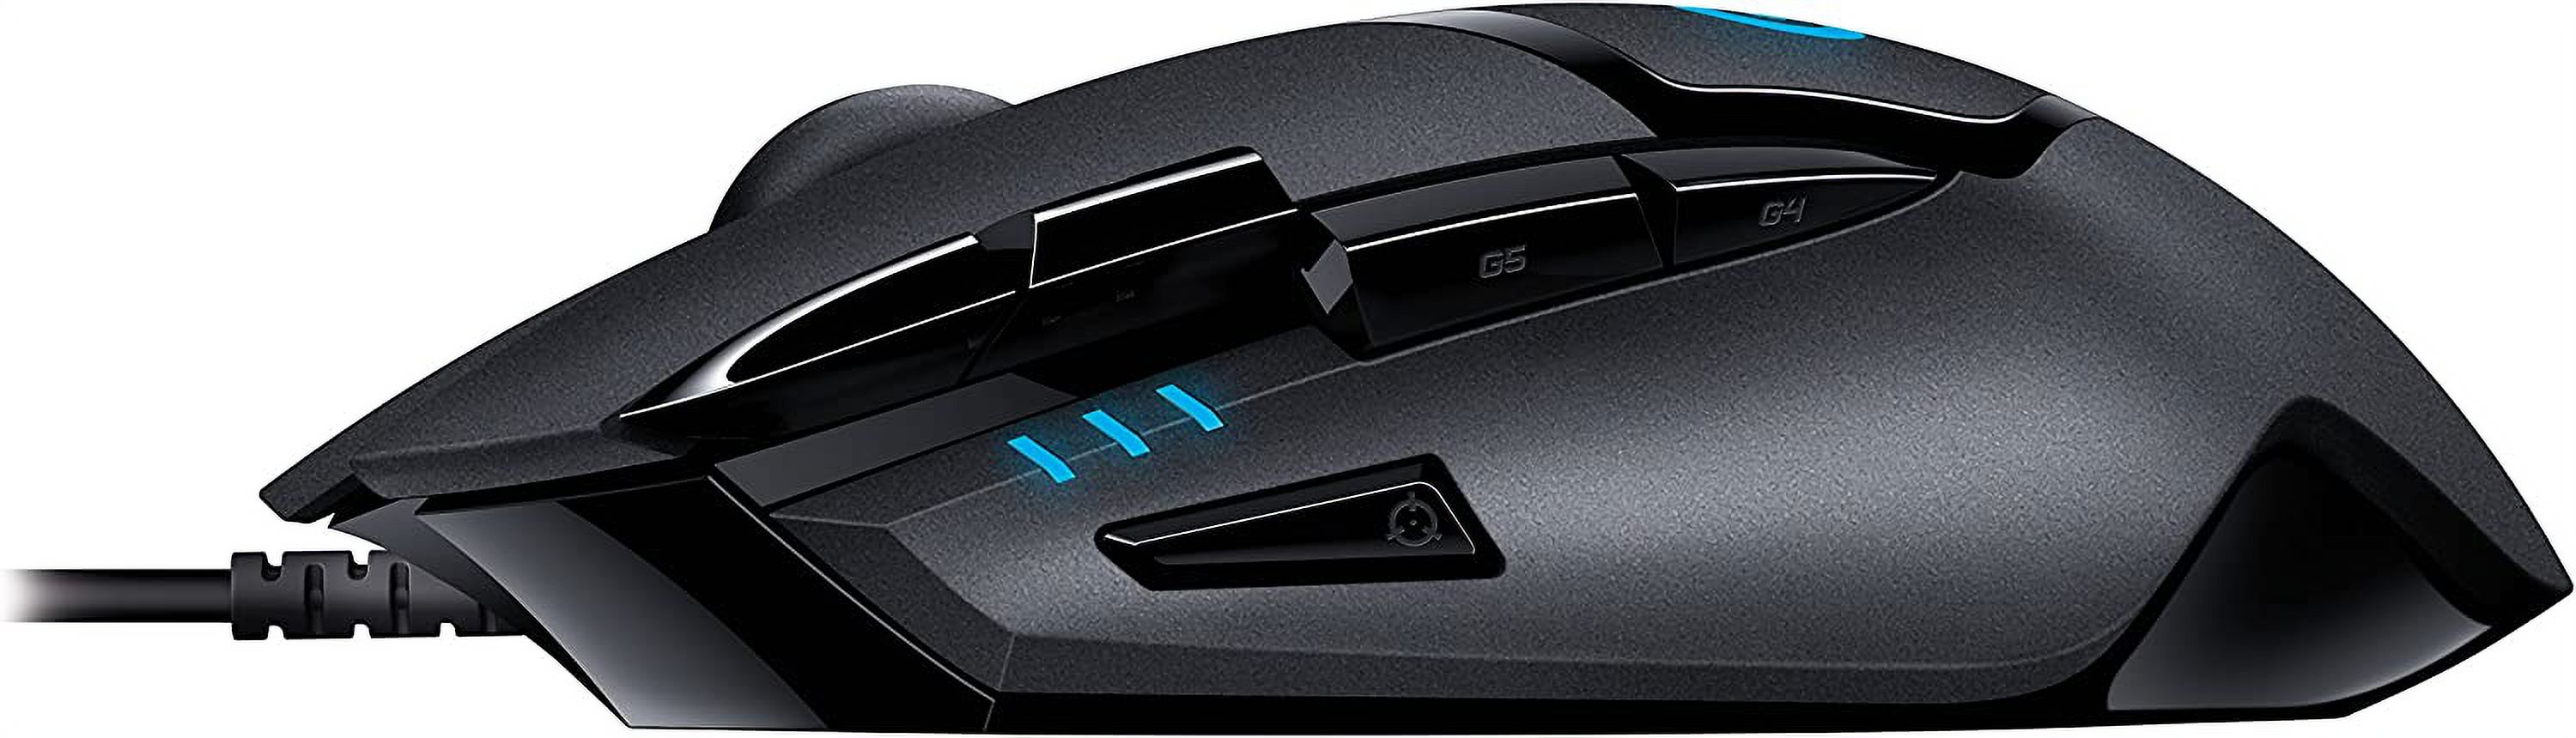 Logitech G402 910-004069 Black Wired Optical Hyperion Fury FPS Gaming Mouse with High Speed Fusion Engine - image 4 of 6